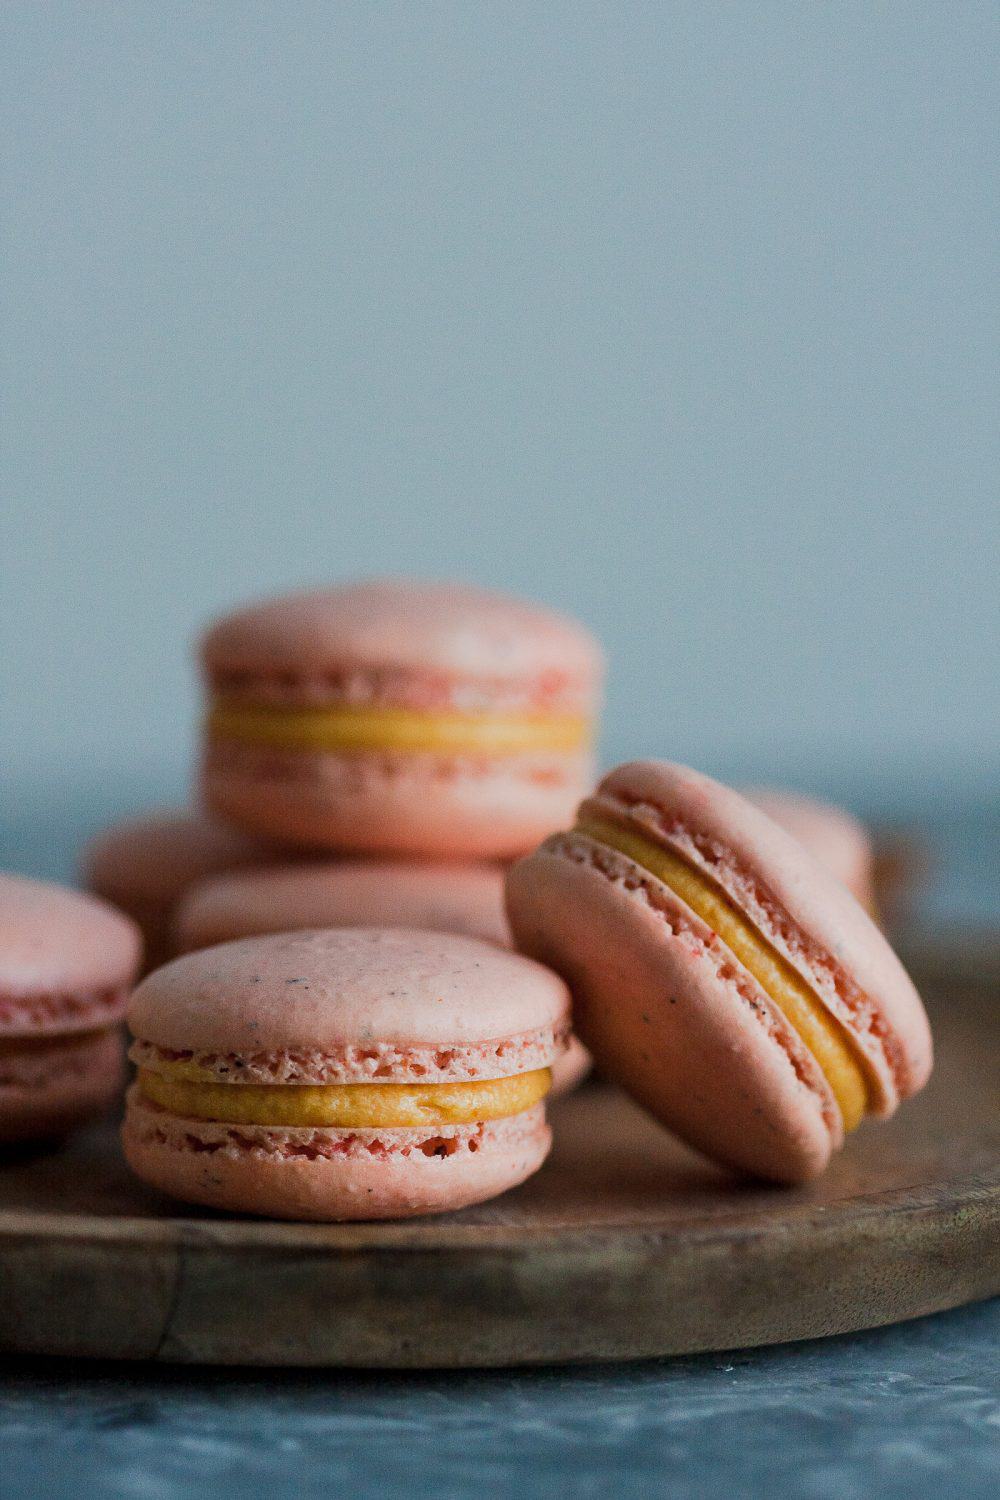 Pink macarons with a yellow filling - Macarons